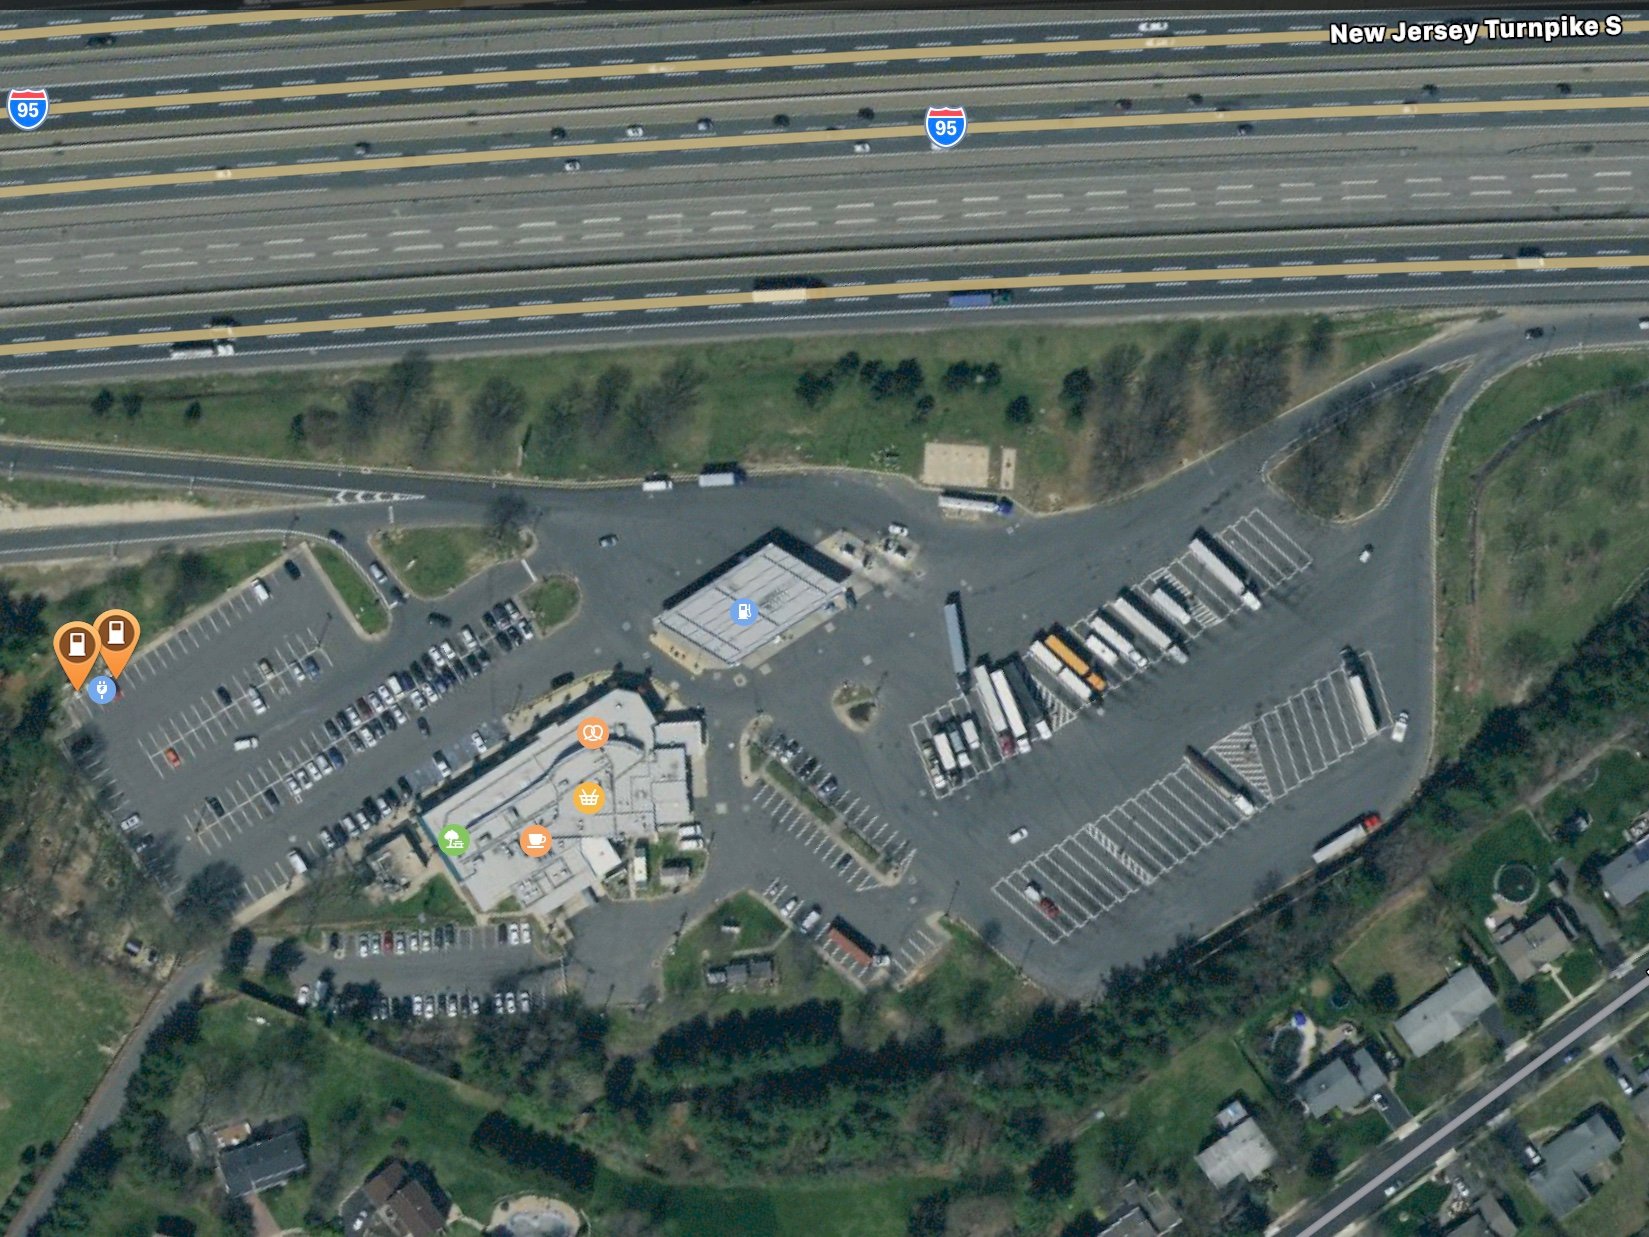 superchargers-on-the-nj-turnpike-speculation-discussion-tesla-motors-club